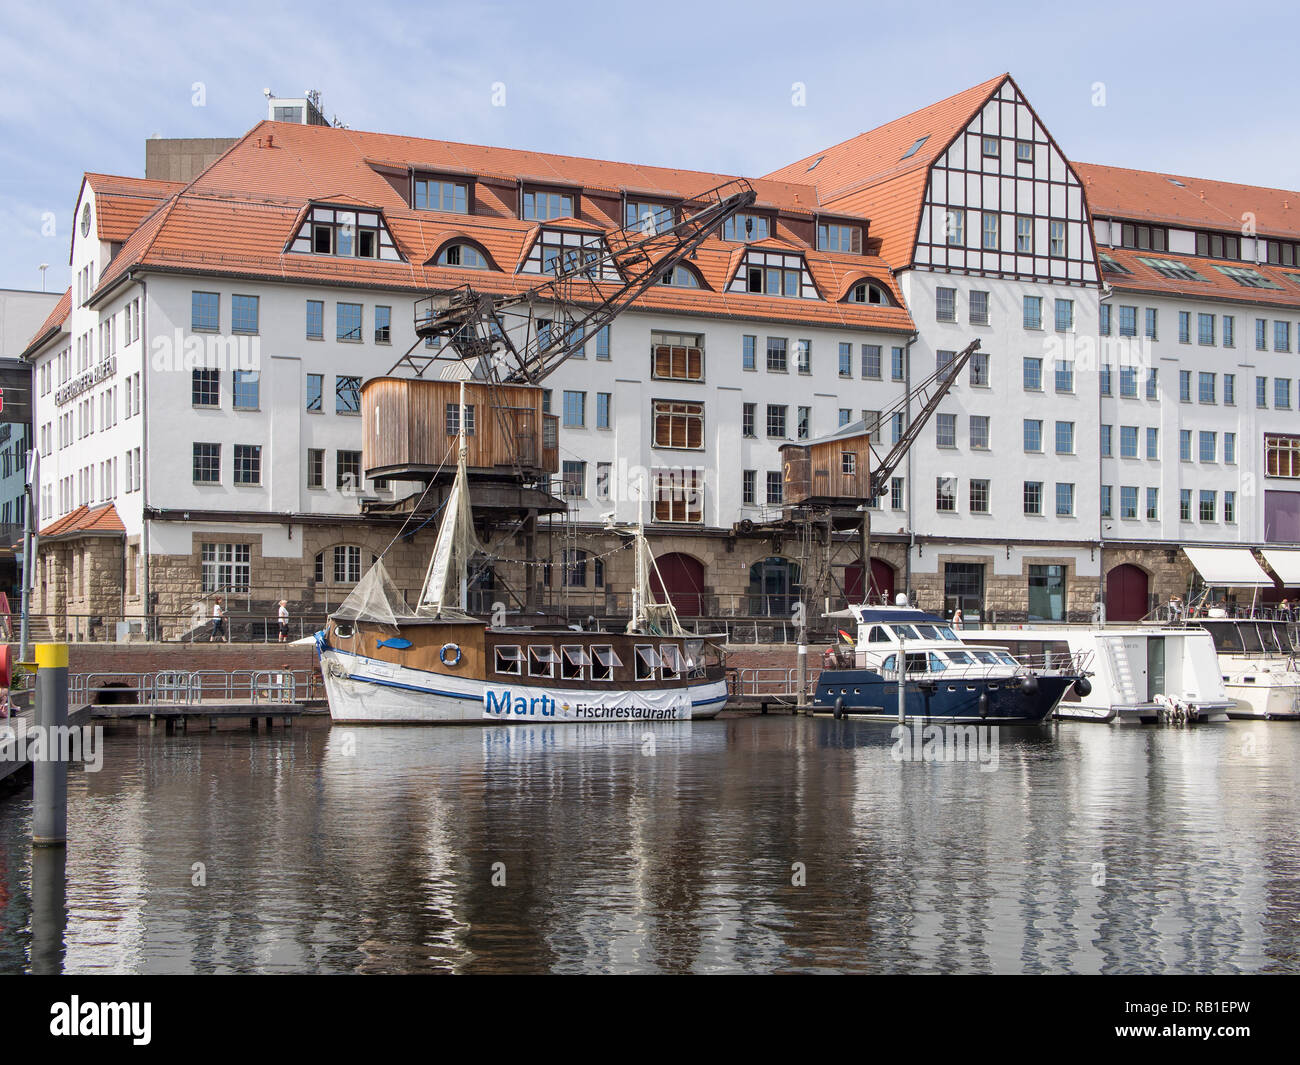 BERLIN, GERMANY - JUNE 21, 2017: Old Wooden Cranes And Boats In Tempelhofer Hafen, Meaning Harbor of Tempelhof In German Language, In Berlin Stock Photo